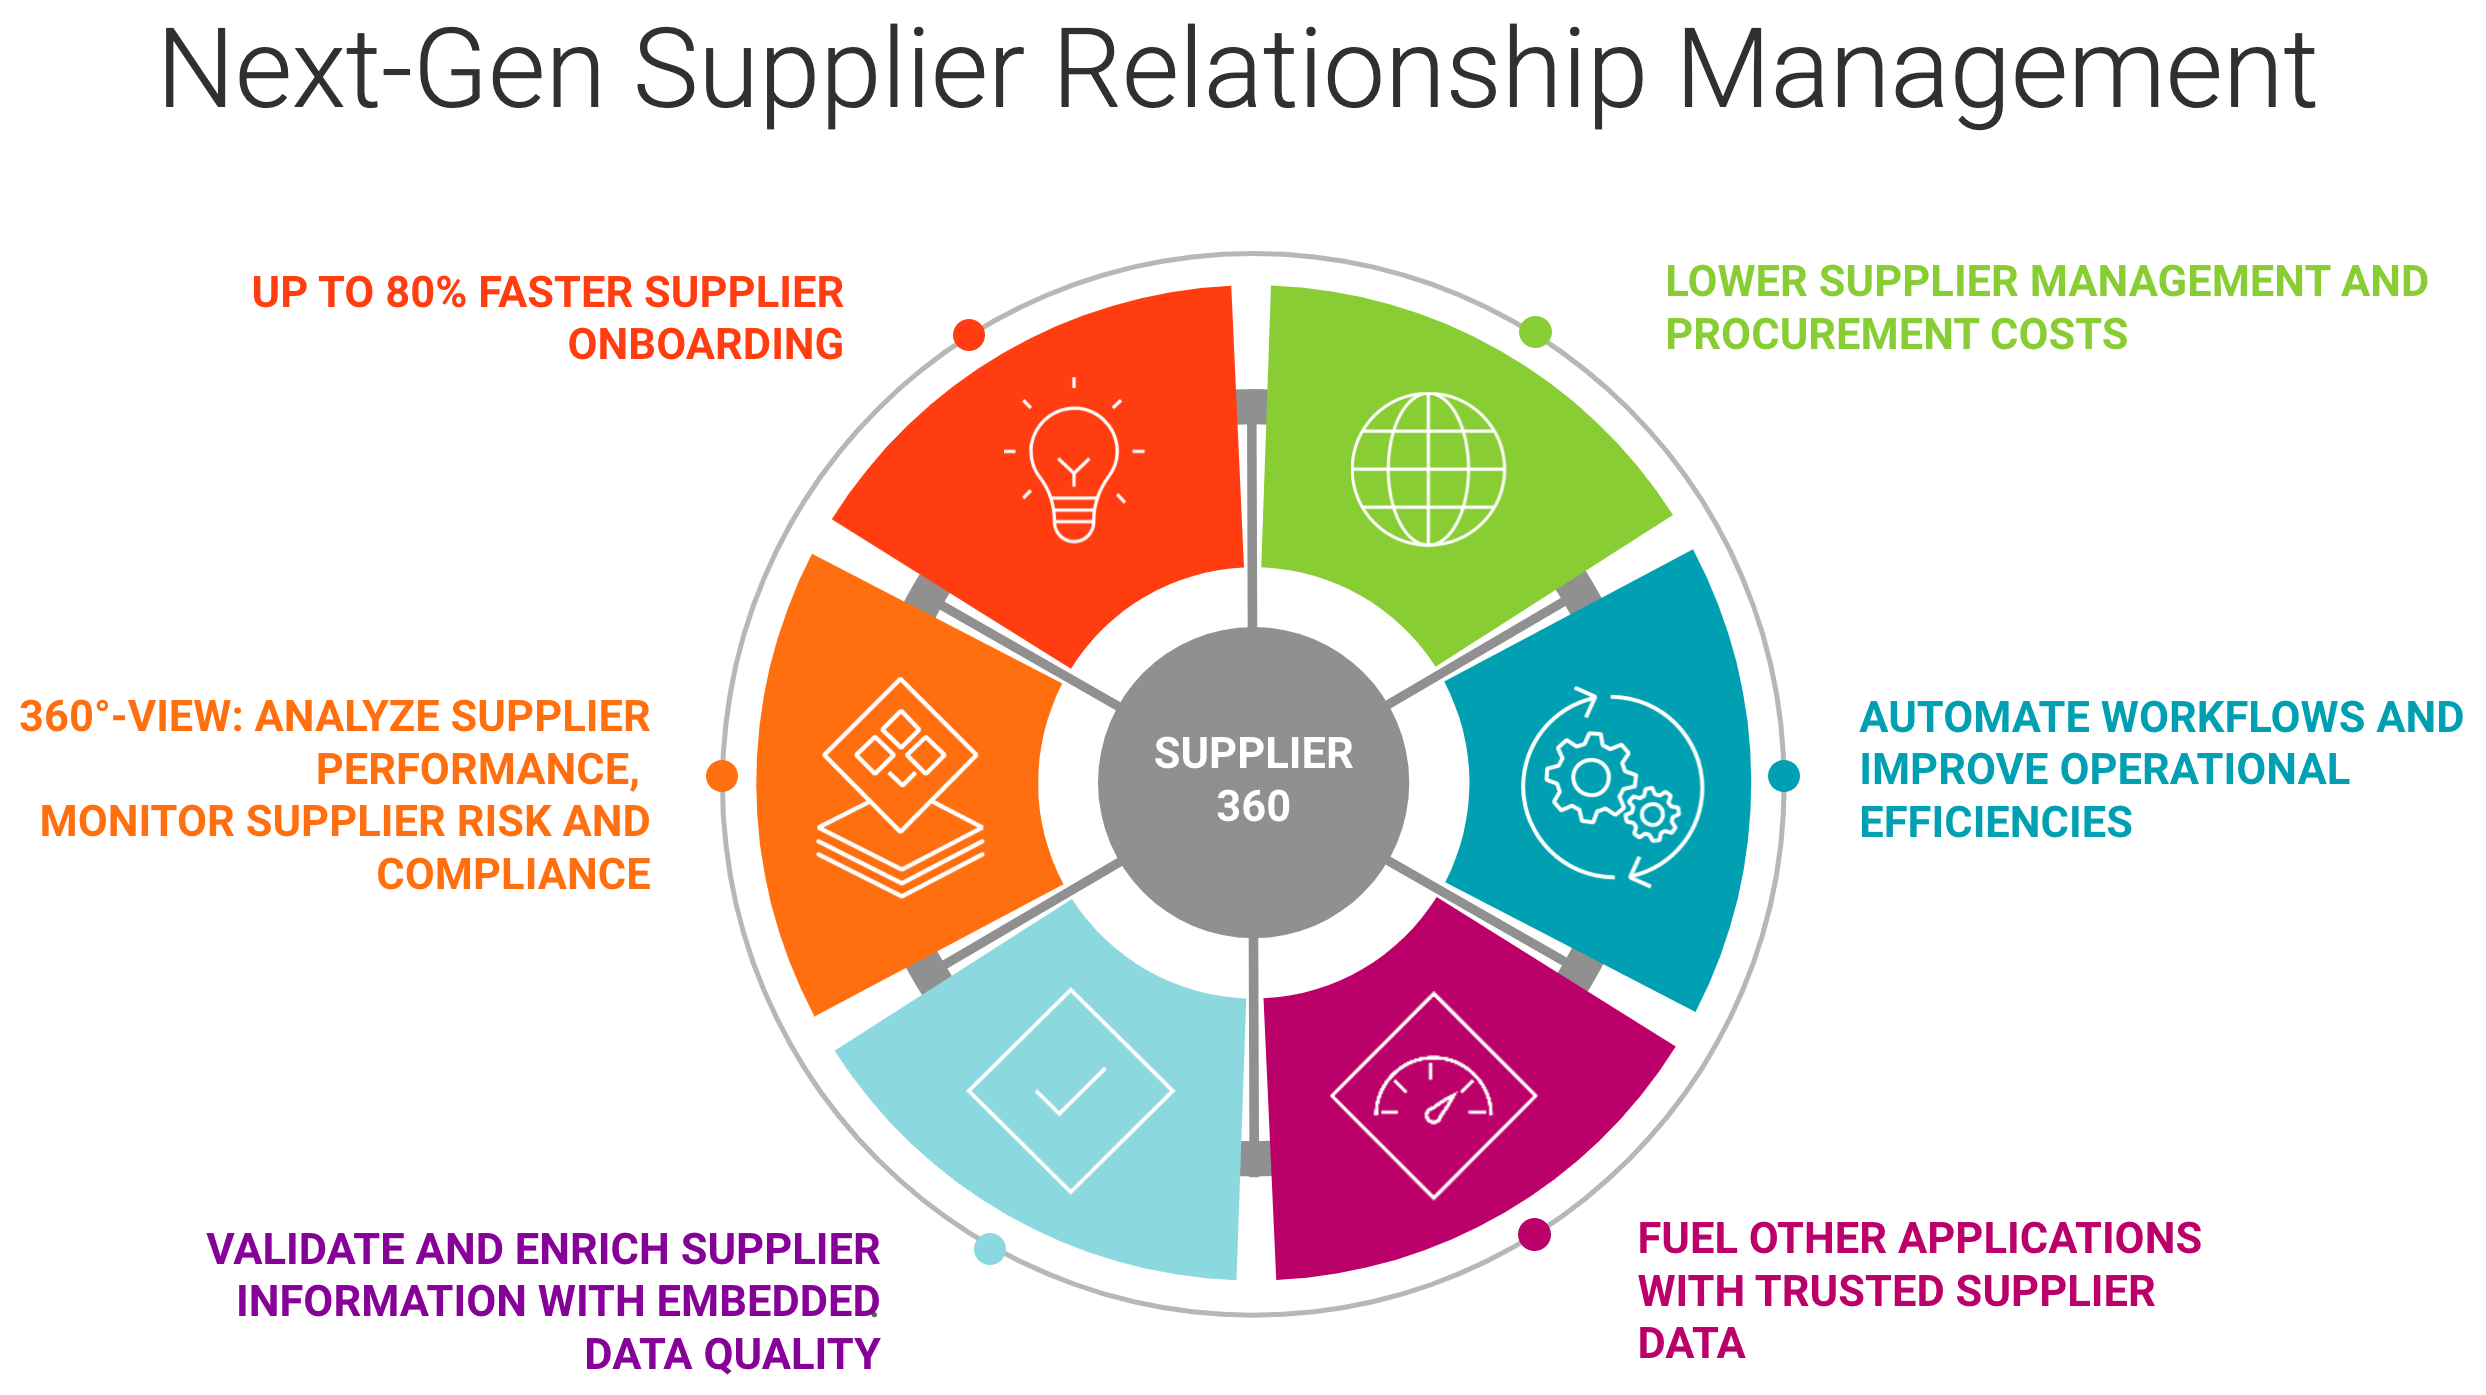 A 360-degree view of suppliers is the foundation for successful supplier relationship management